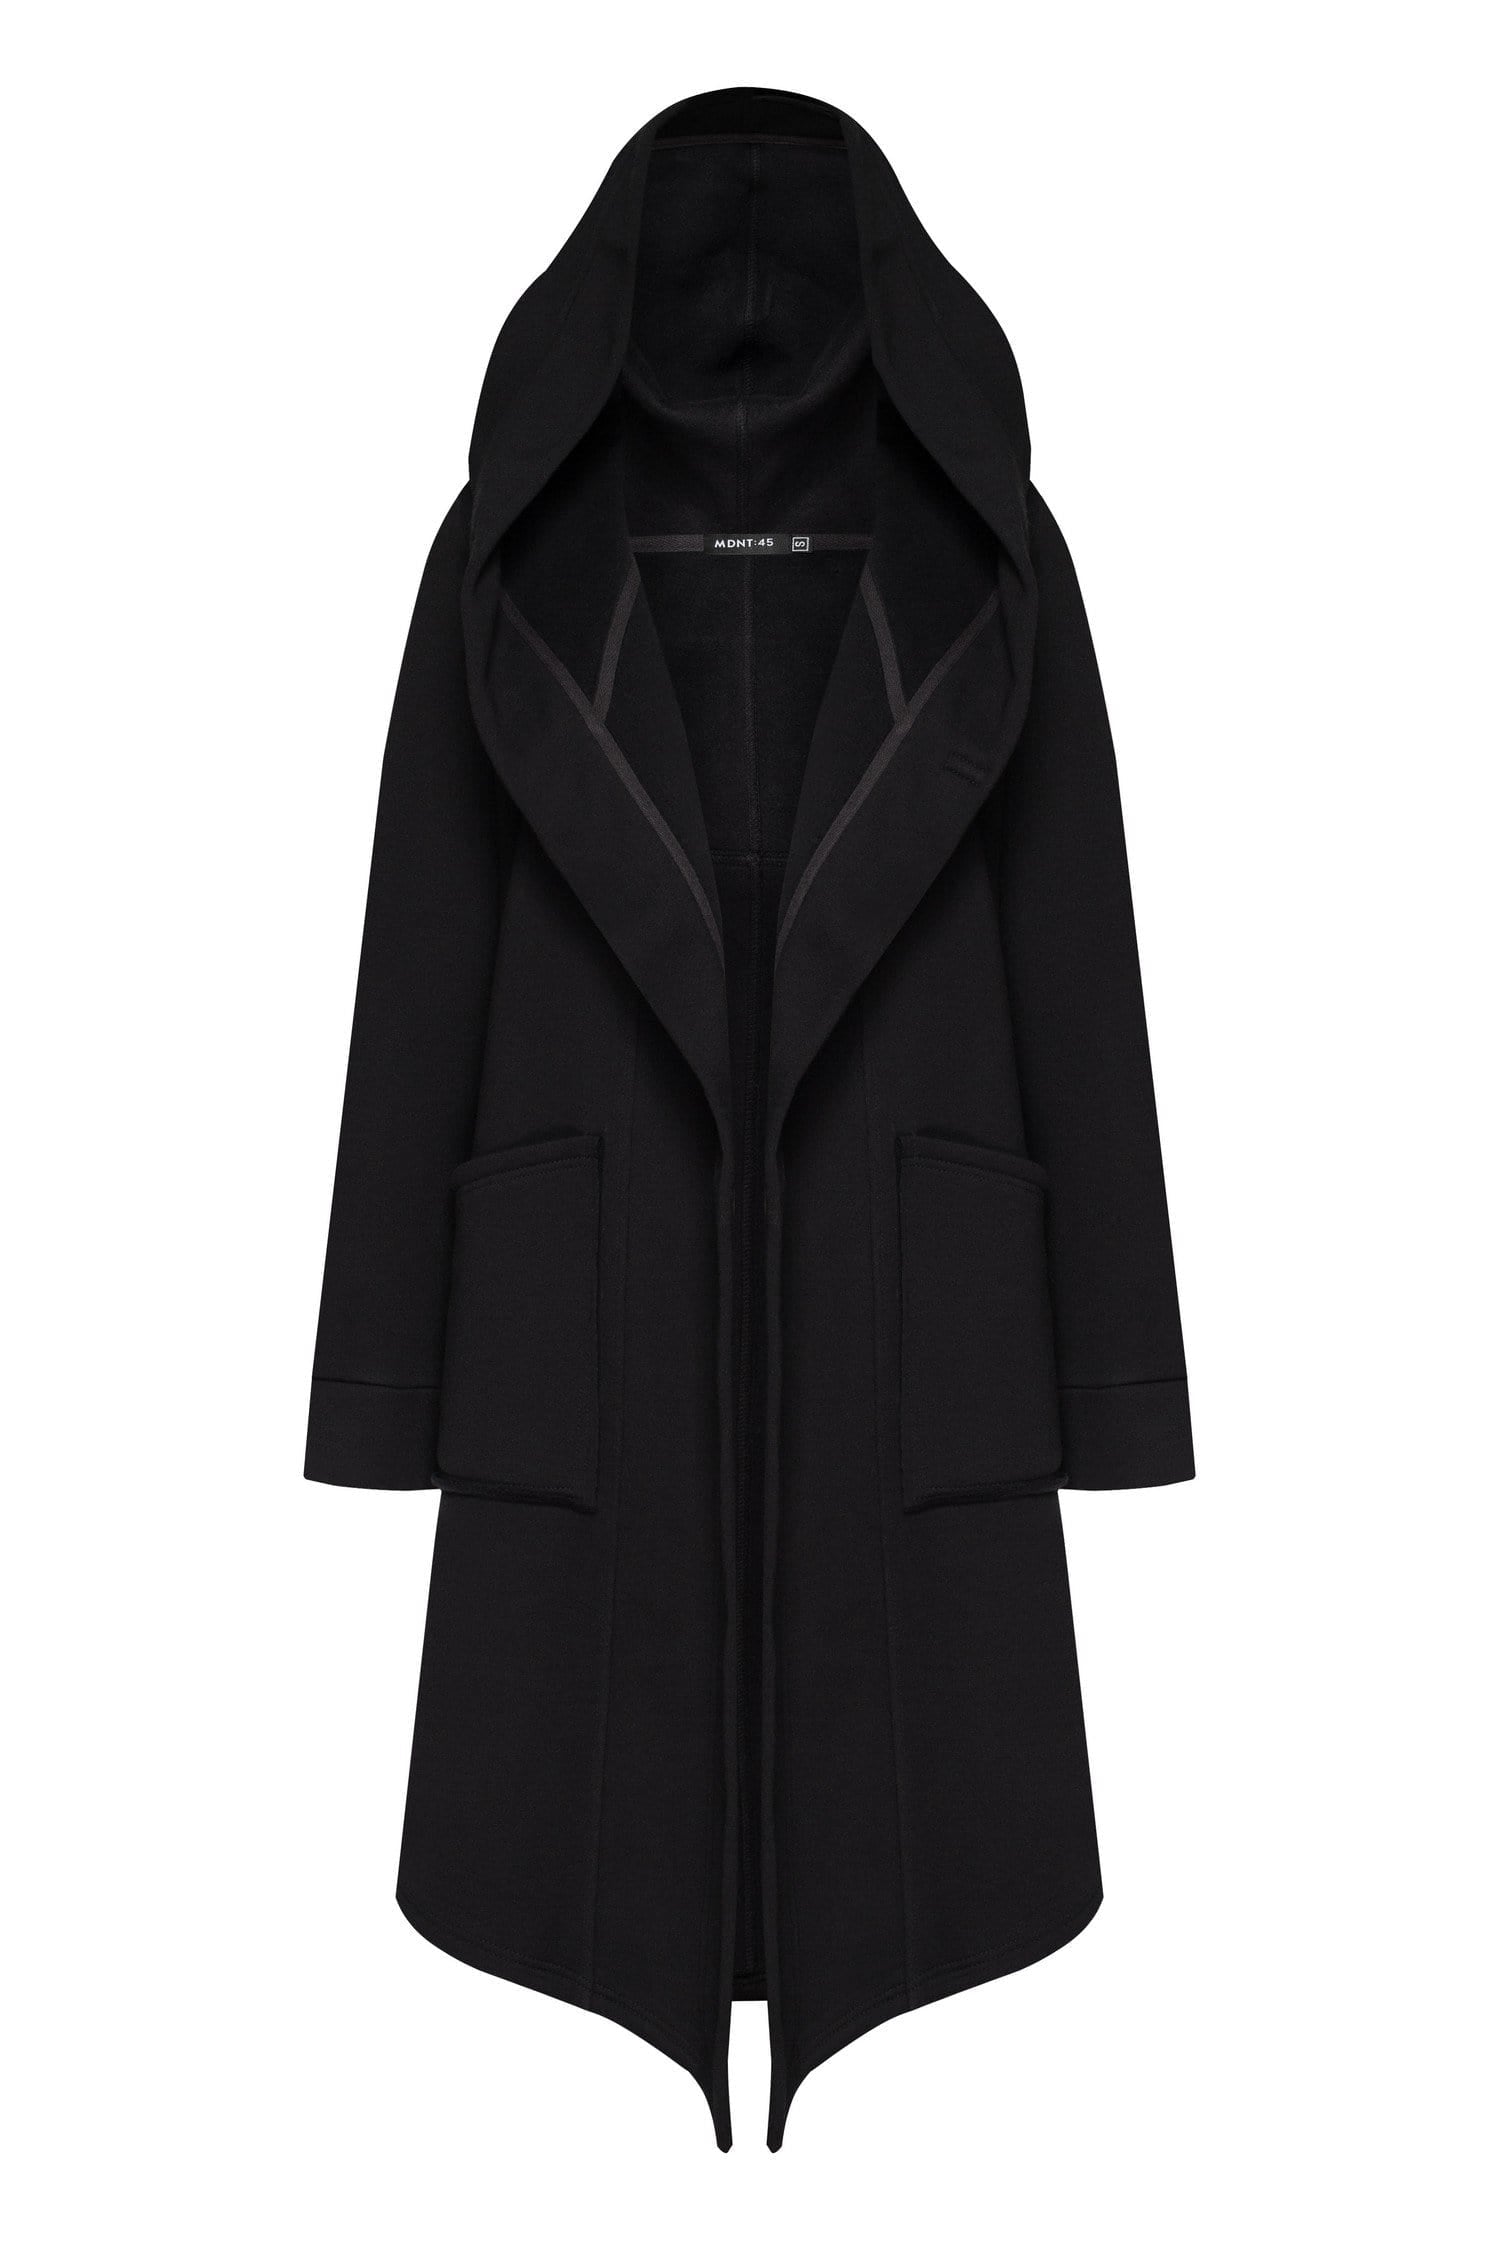 MDNT45 Coats & Jackets for Woman Unisex hooded cloak